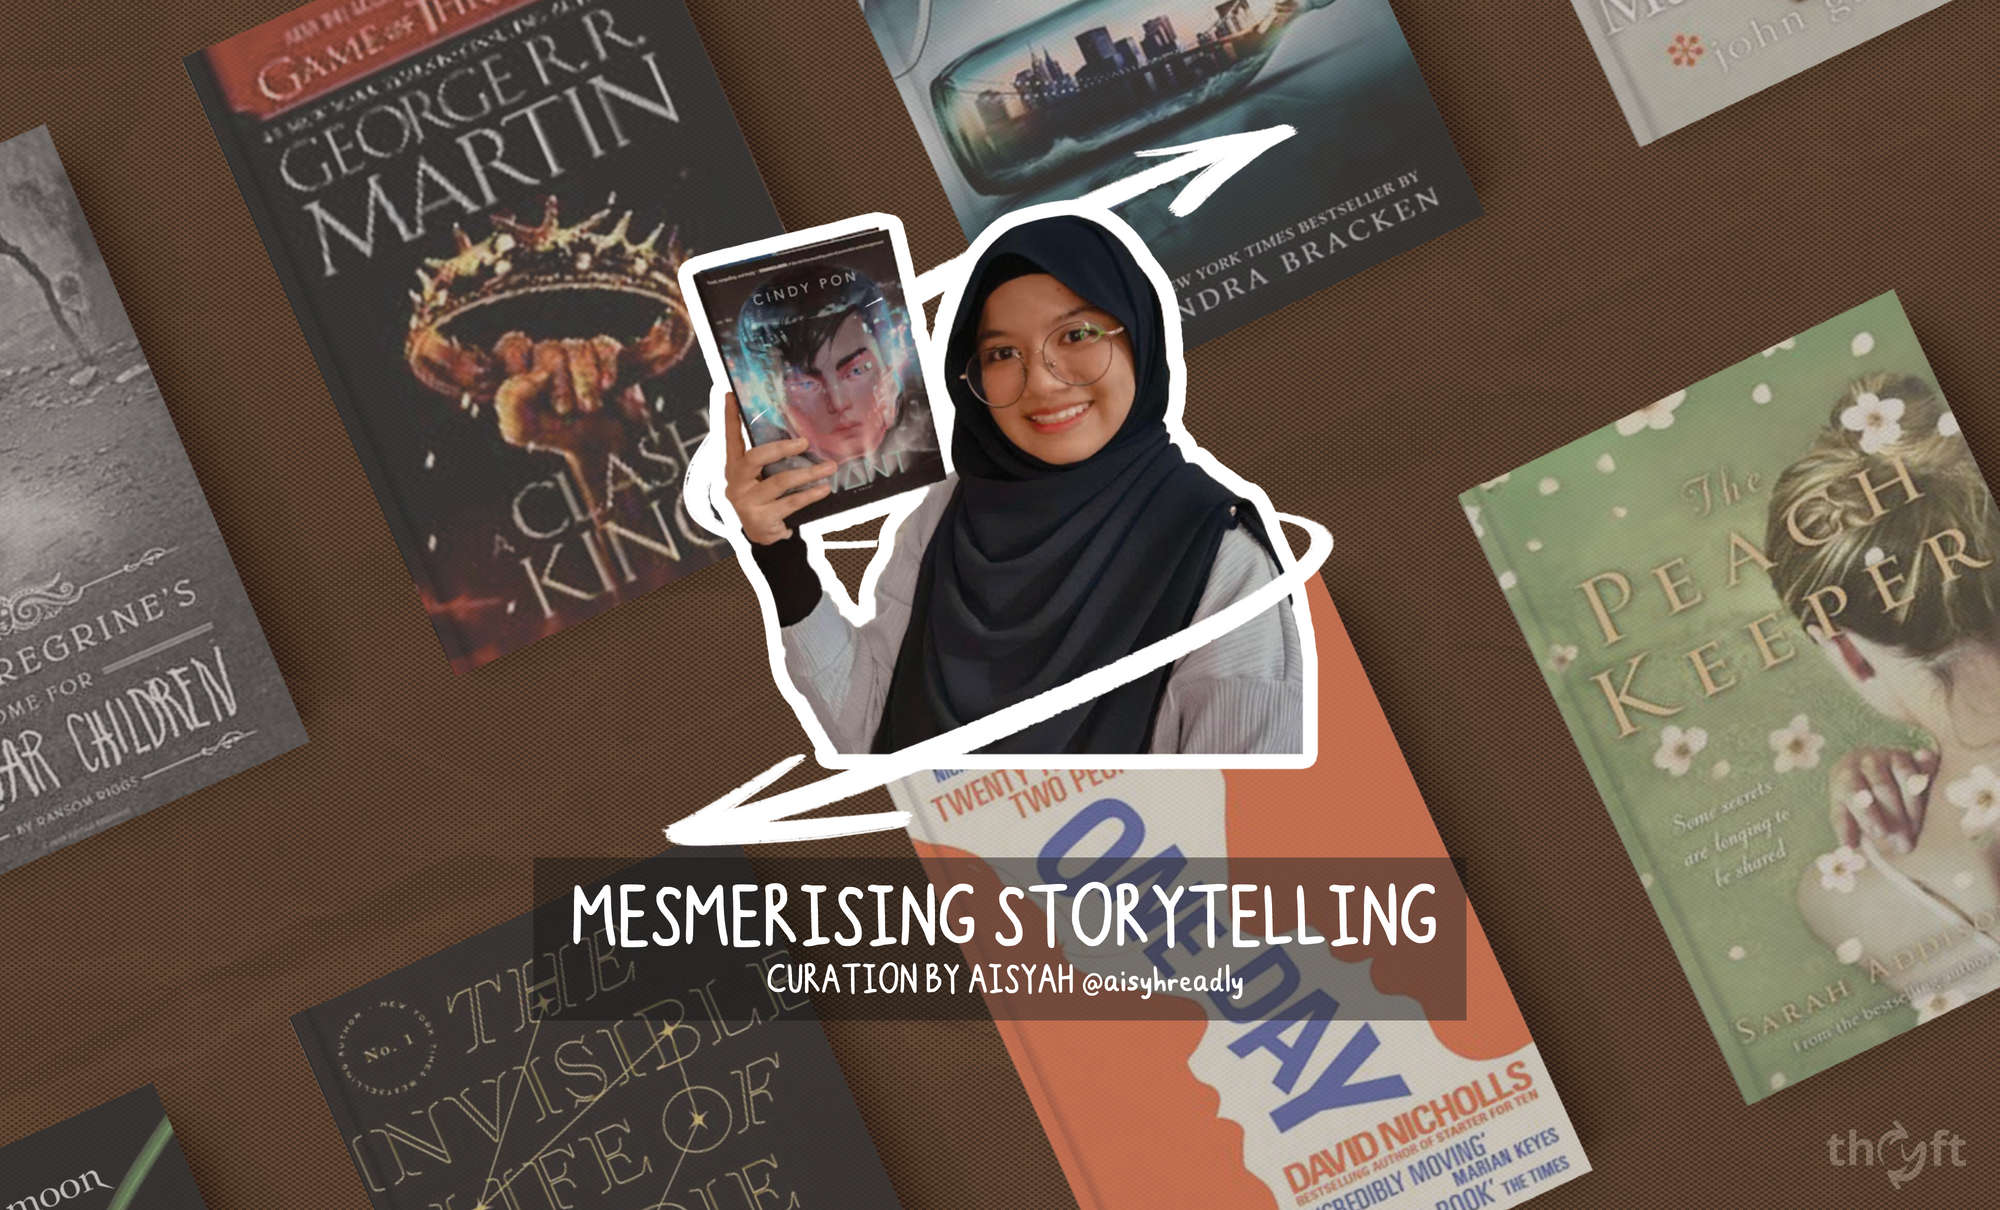 Mesmerising Storytelling - Recommendations by Aisyah